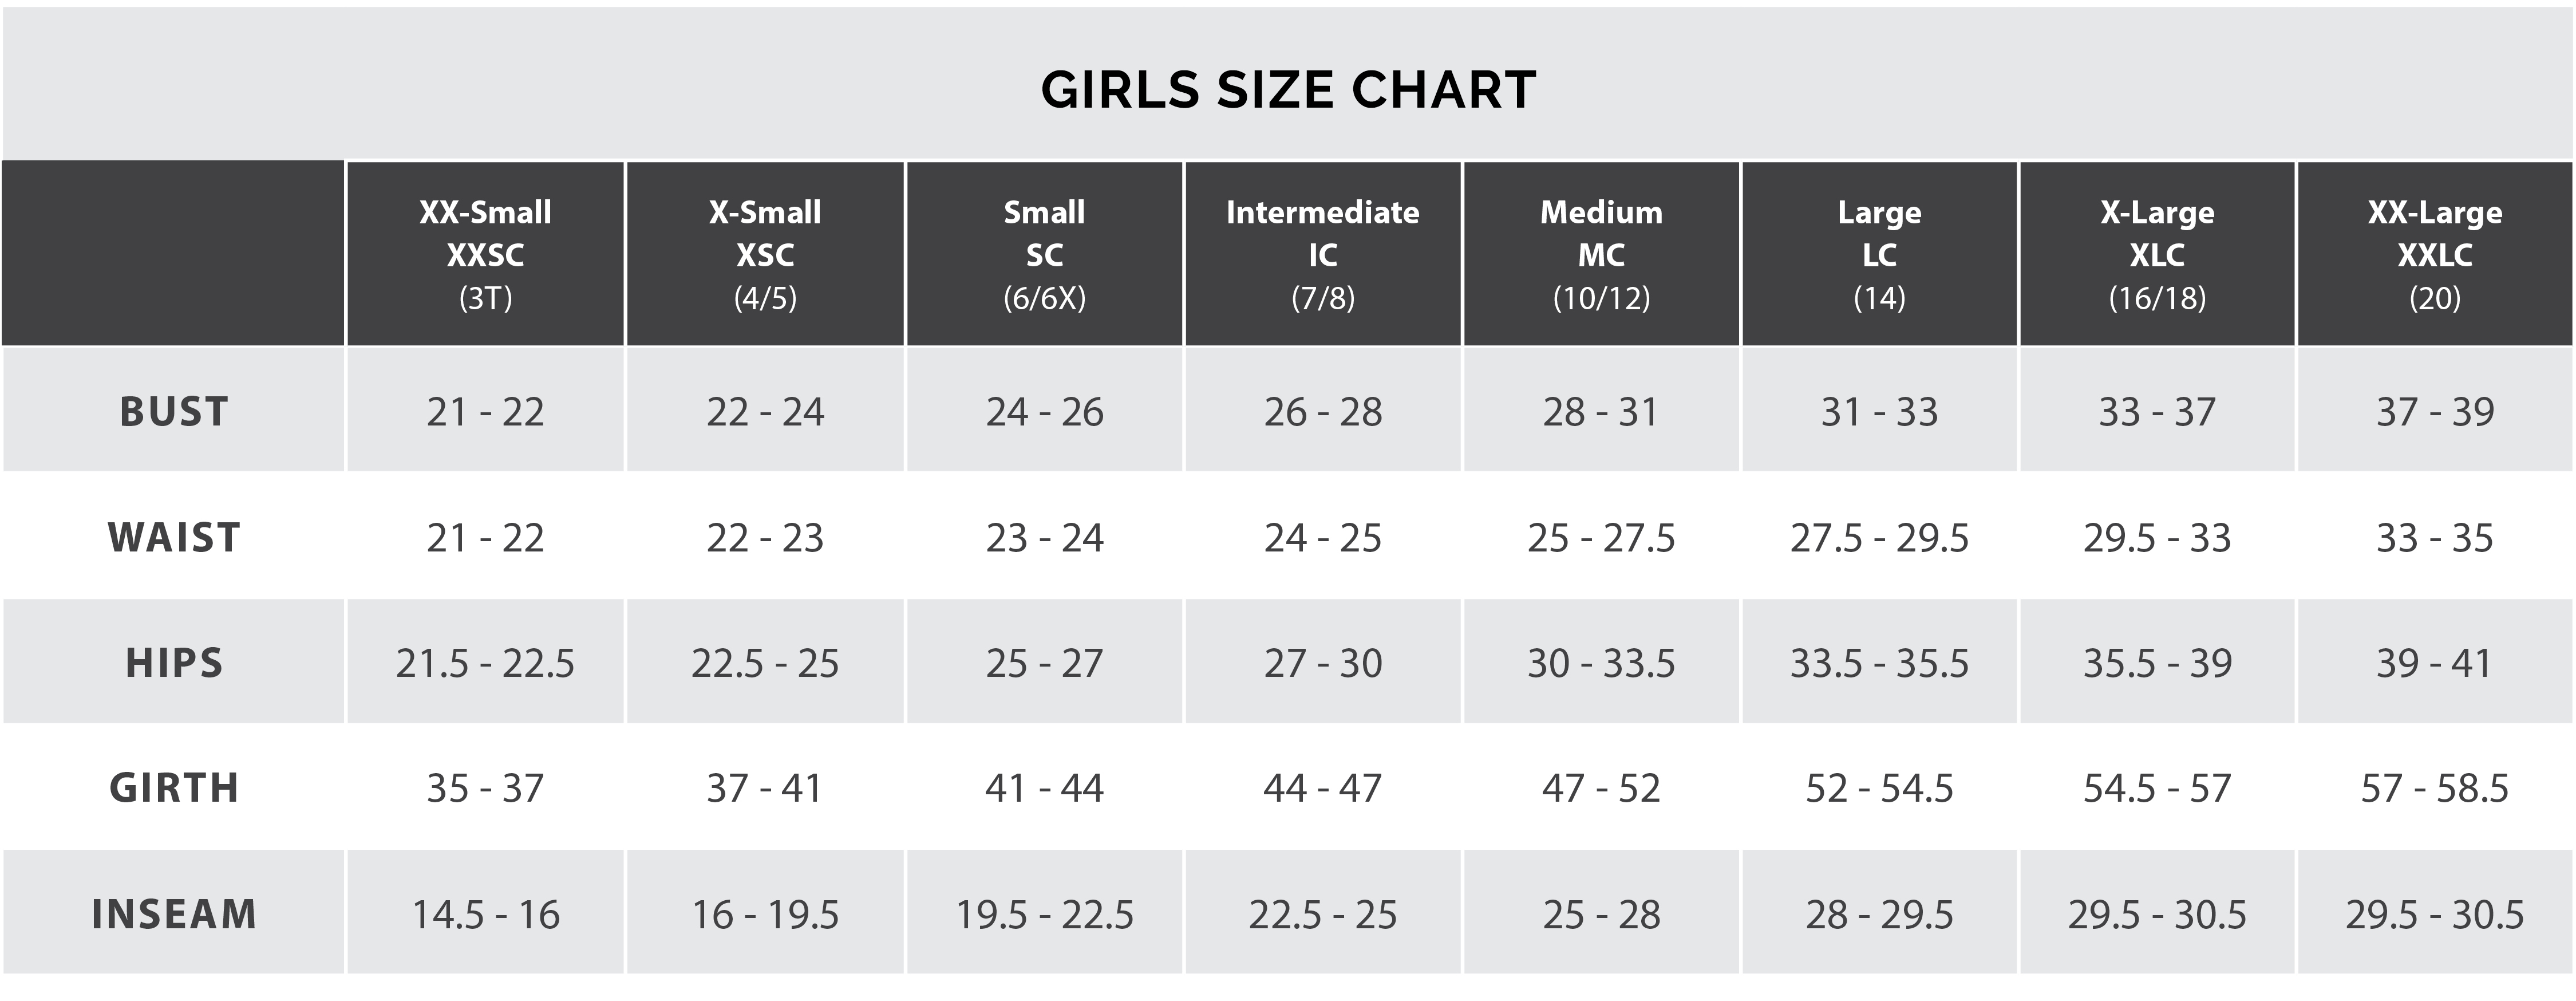 child girls size chart inches